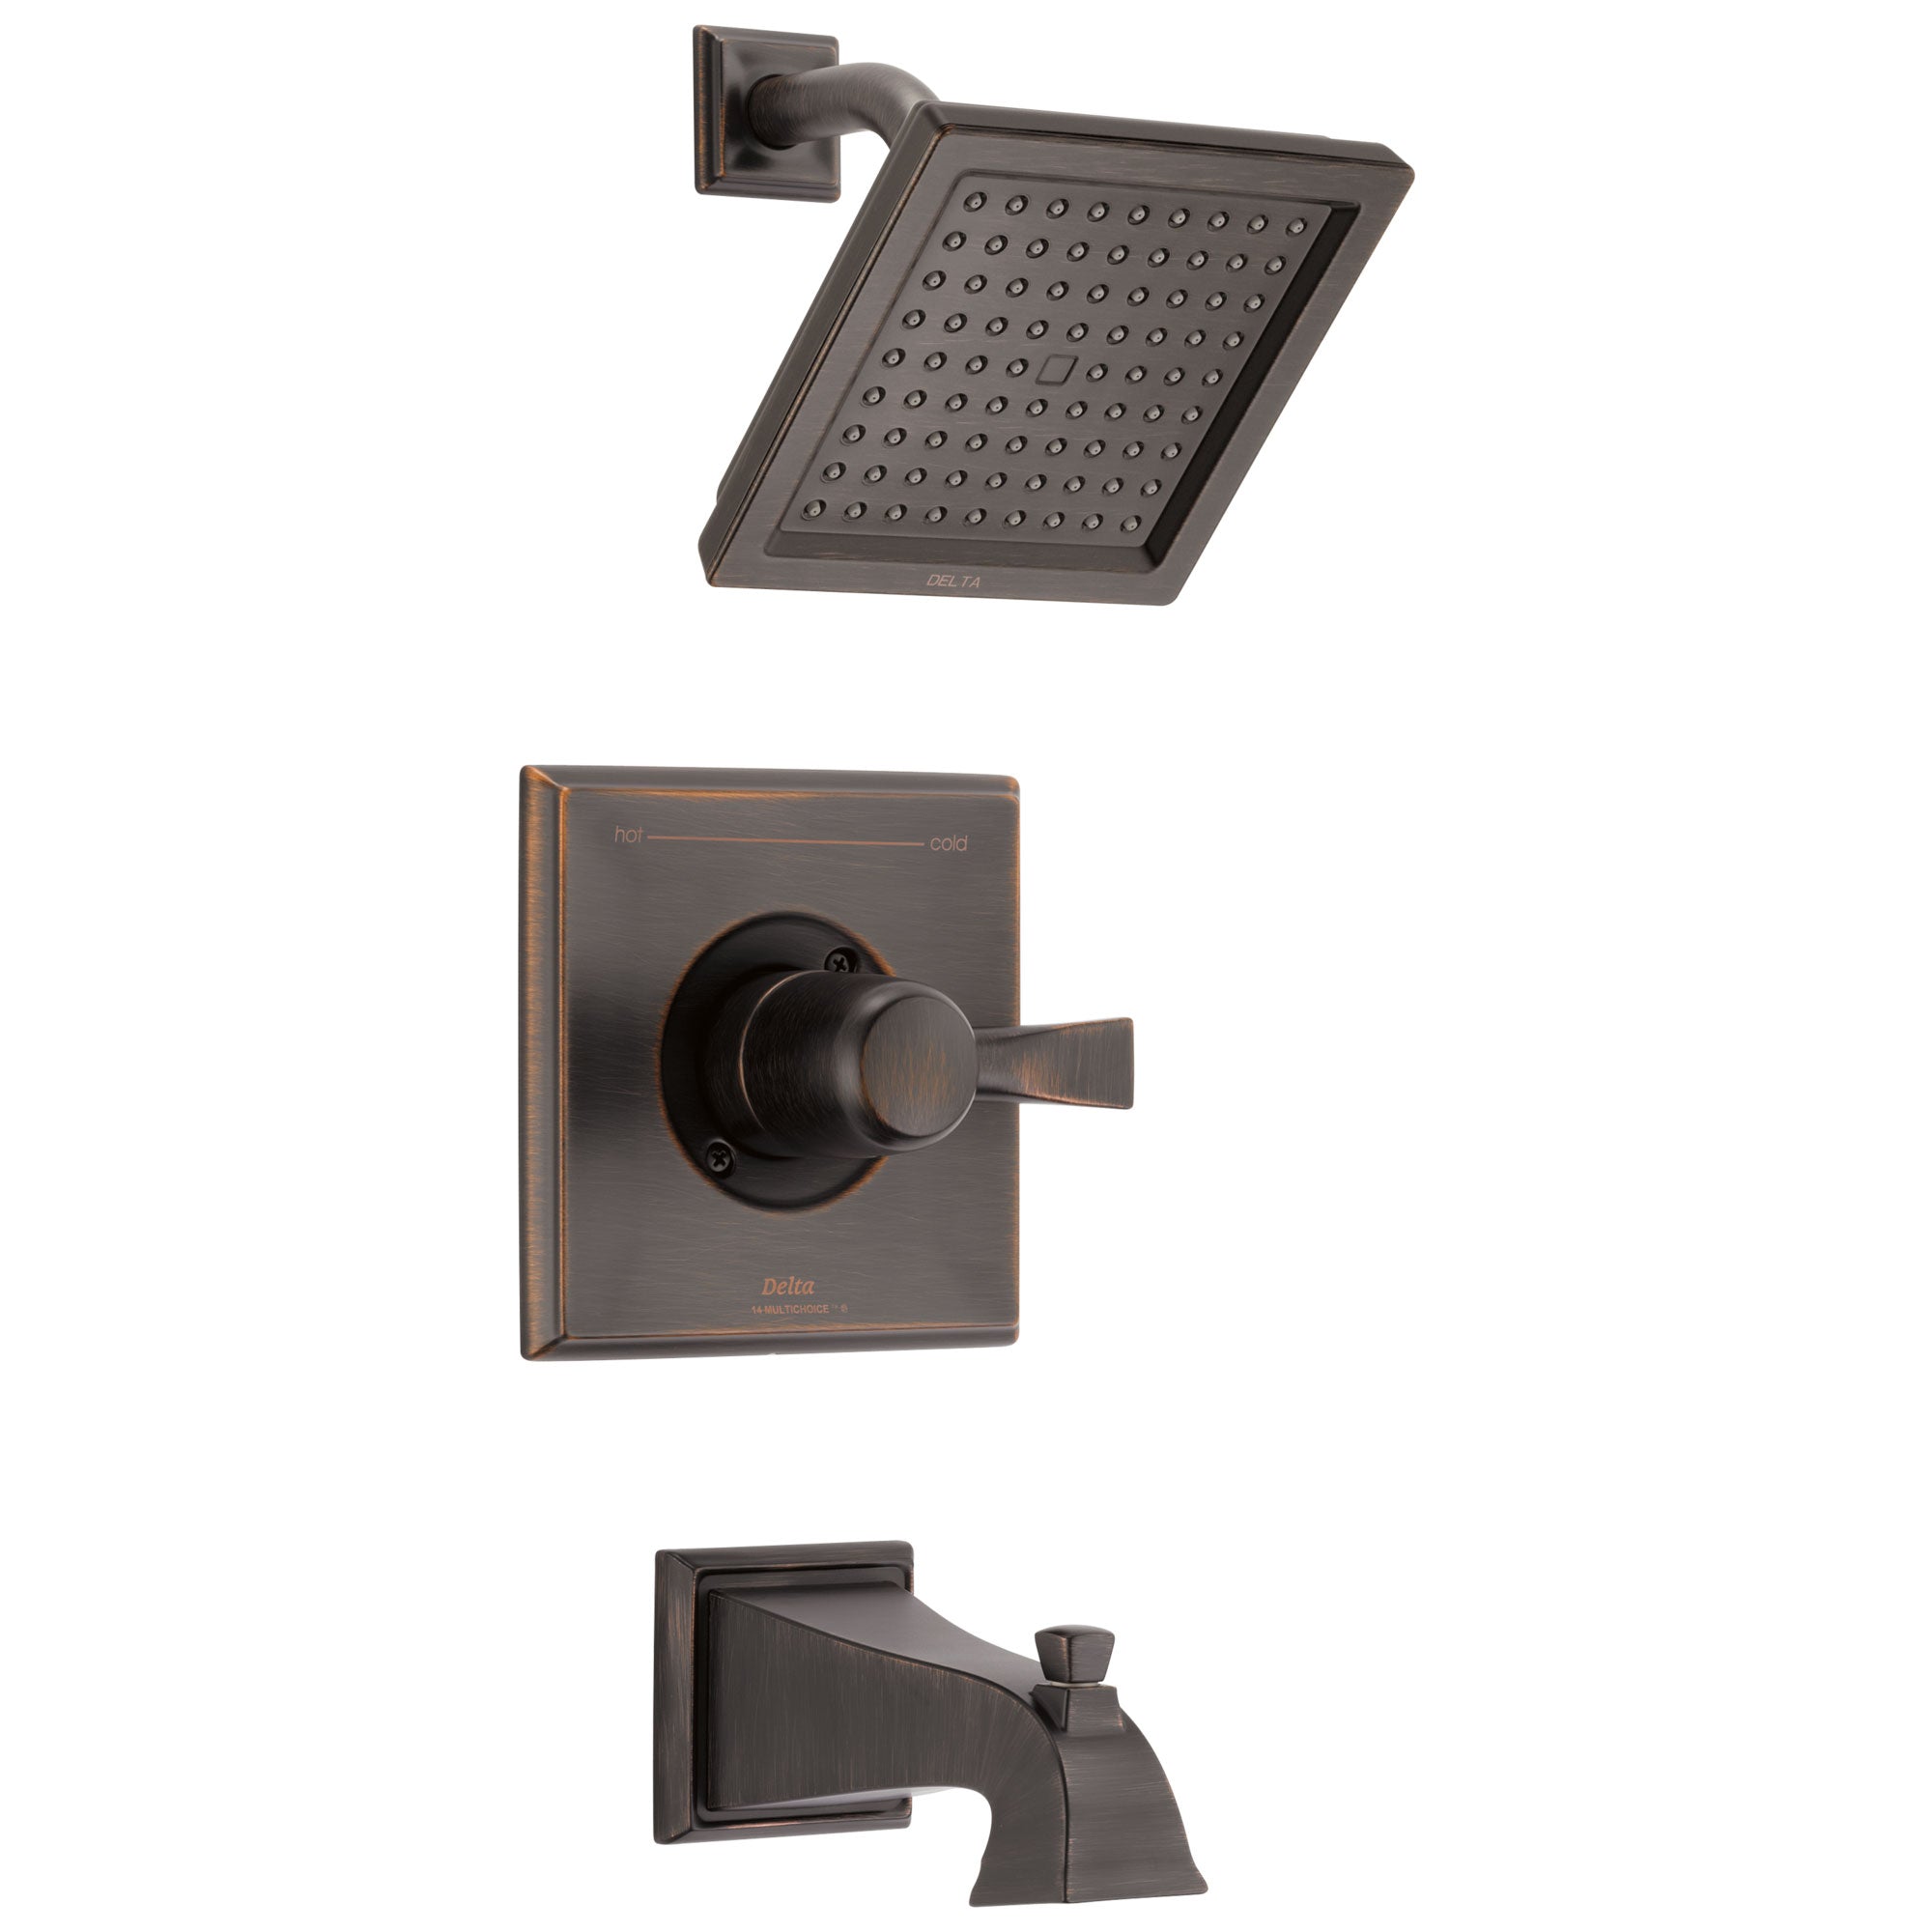 Delta Dryden Venetian Bronze Finish Water Efficient Tub & Shower Combination Faucet Includes Single Handle, Cartridge, and Valve without Stops D3459V